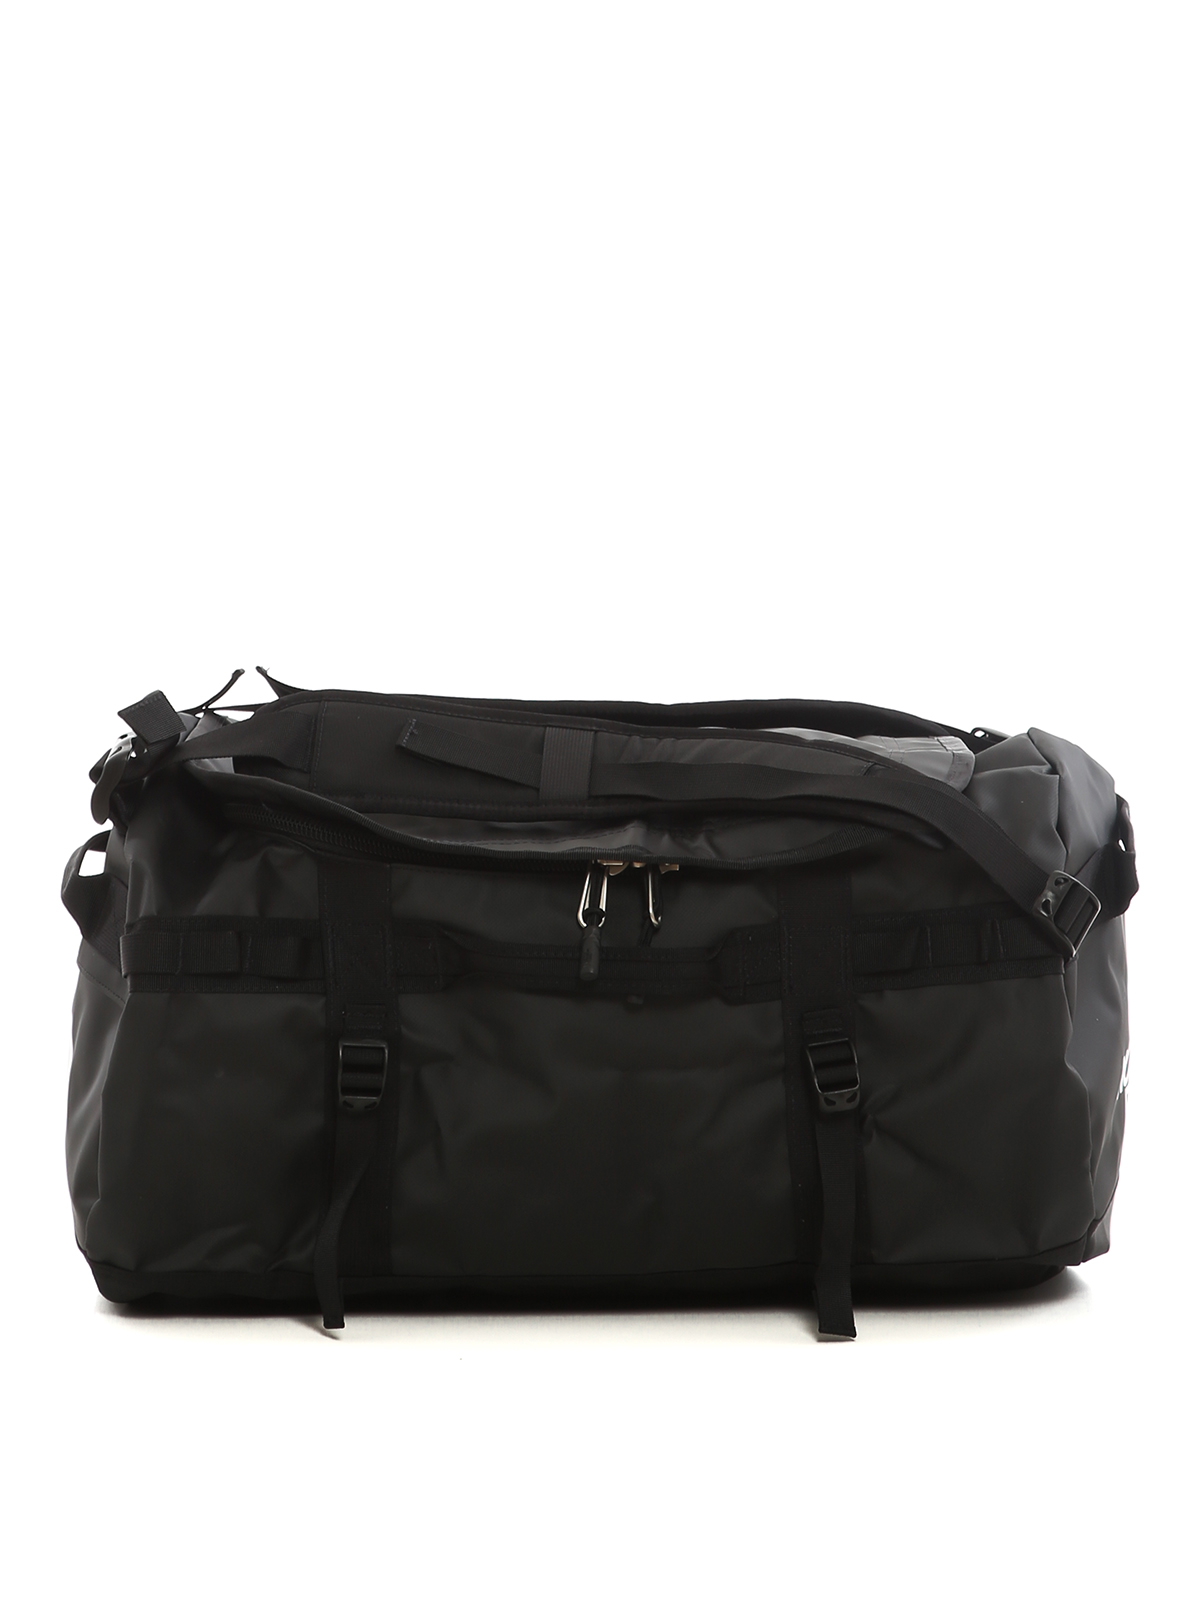 lip tand je bent Luggage & Travel bags The North Face - Base Camp Duffel S bag - NF0A52STKY4